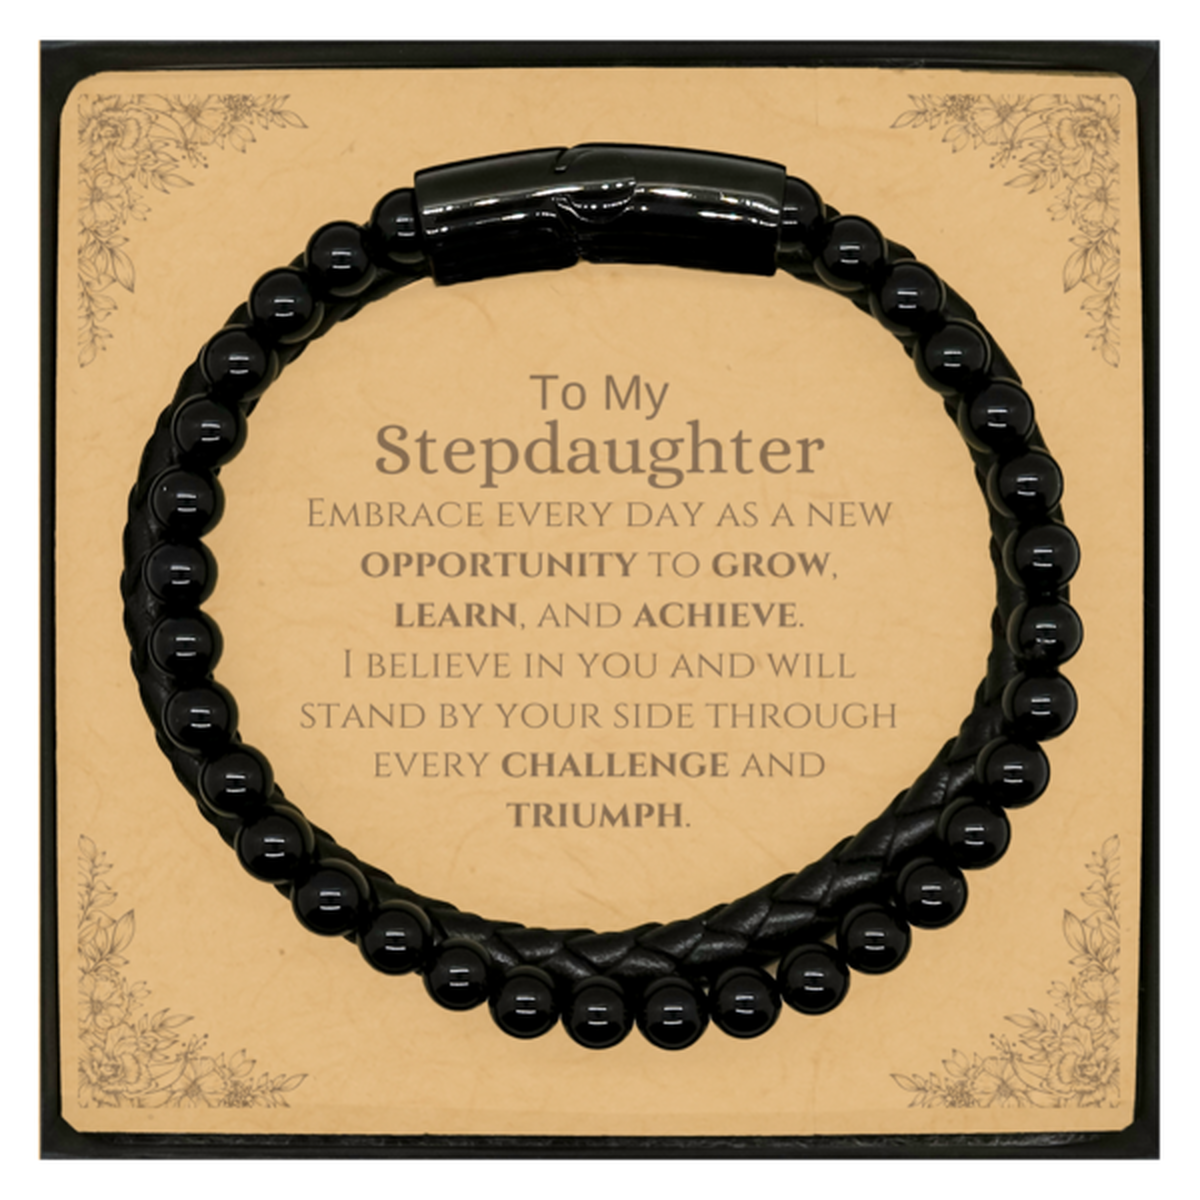 To My Stepdaughter Gifts, I believe in you and will stand by your side, Inspirational Stone Leather Bracelets For Stepdaughter, Birthday Christmas Motivational Stepdaughter Gifts